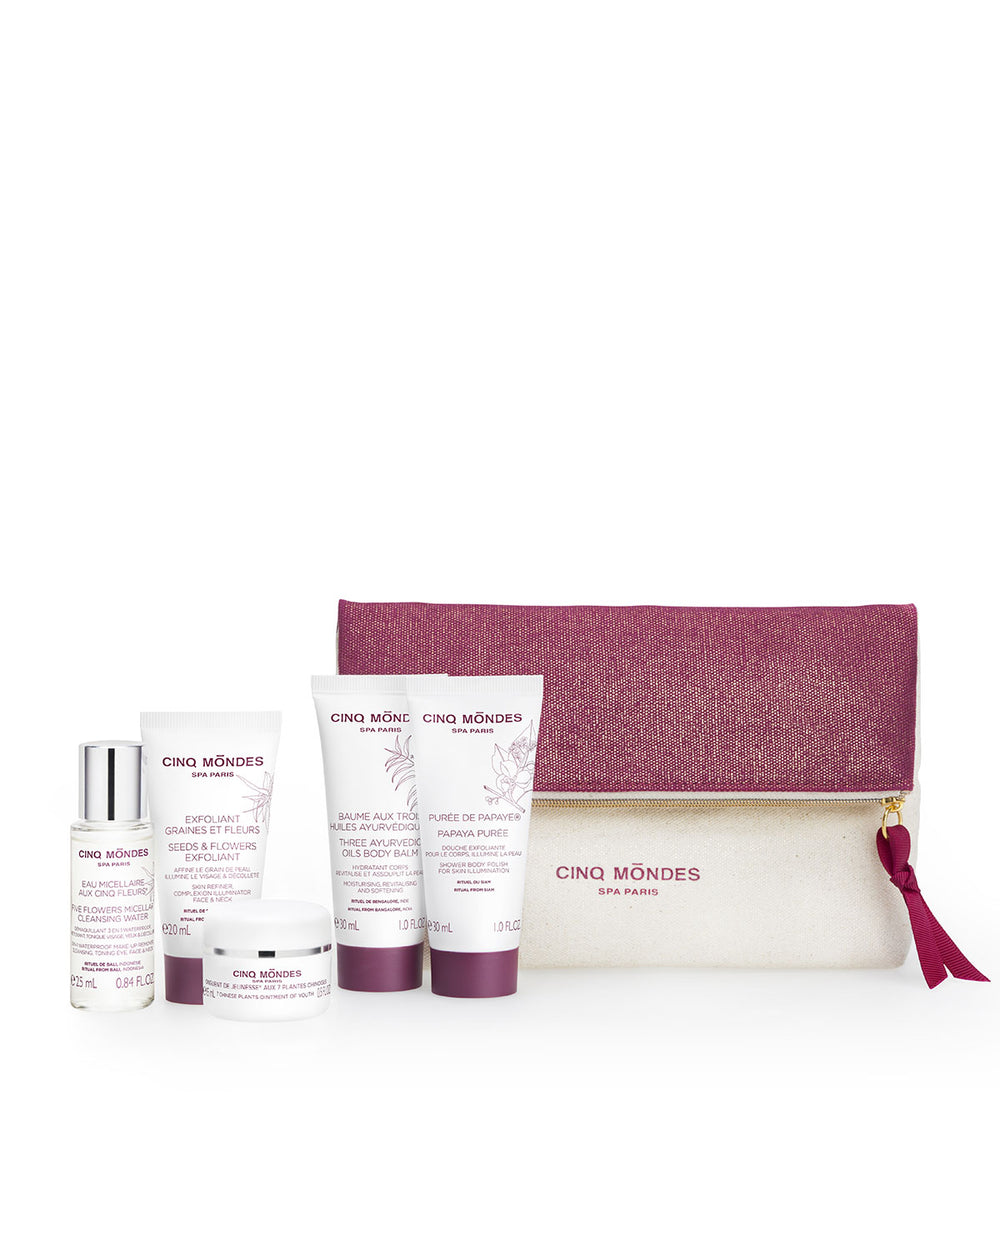 Cinq Mondes Beauty Rituals of the World Collection pouch